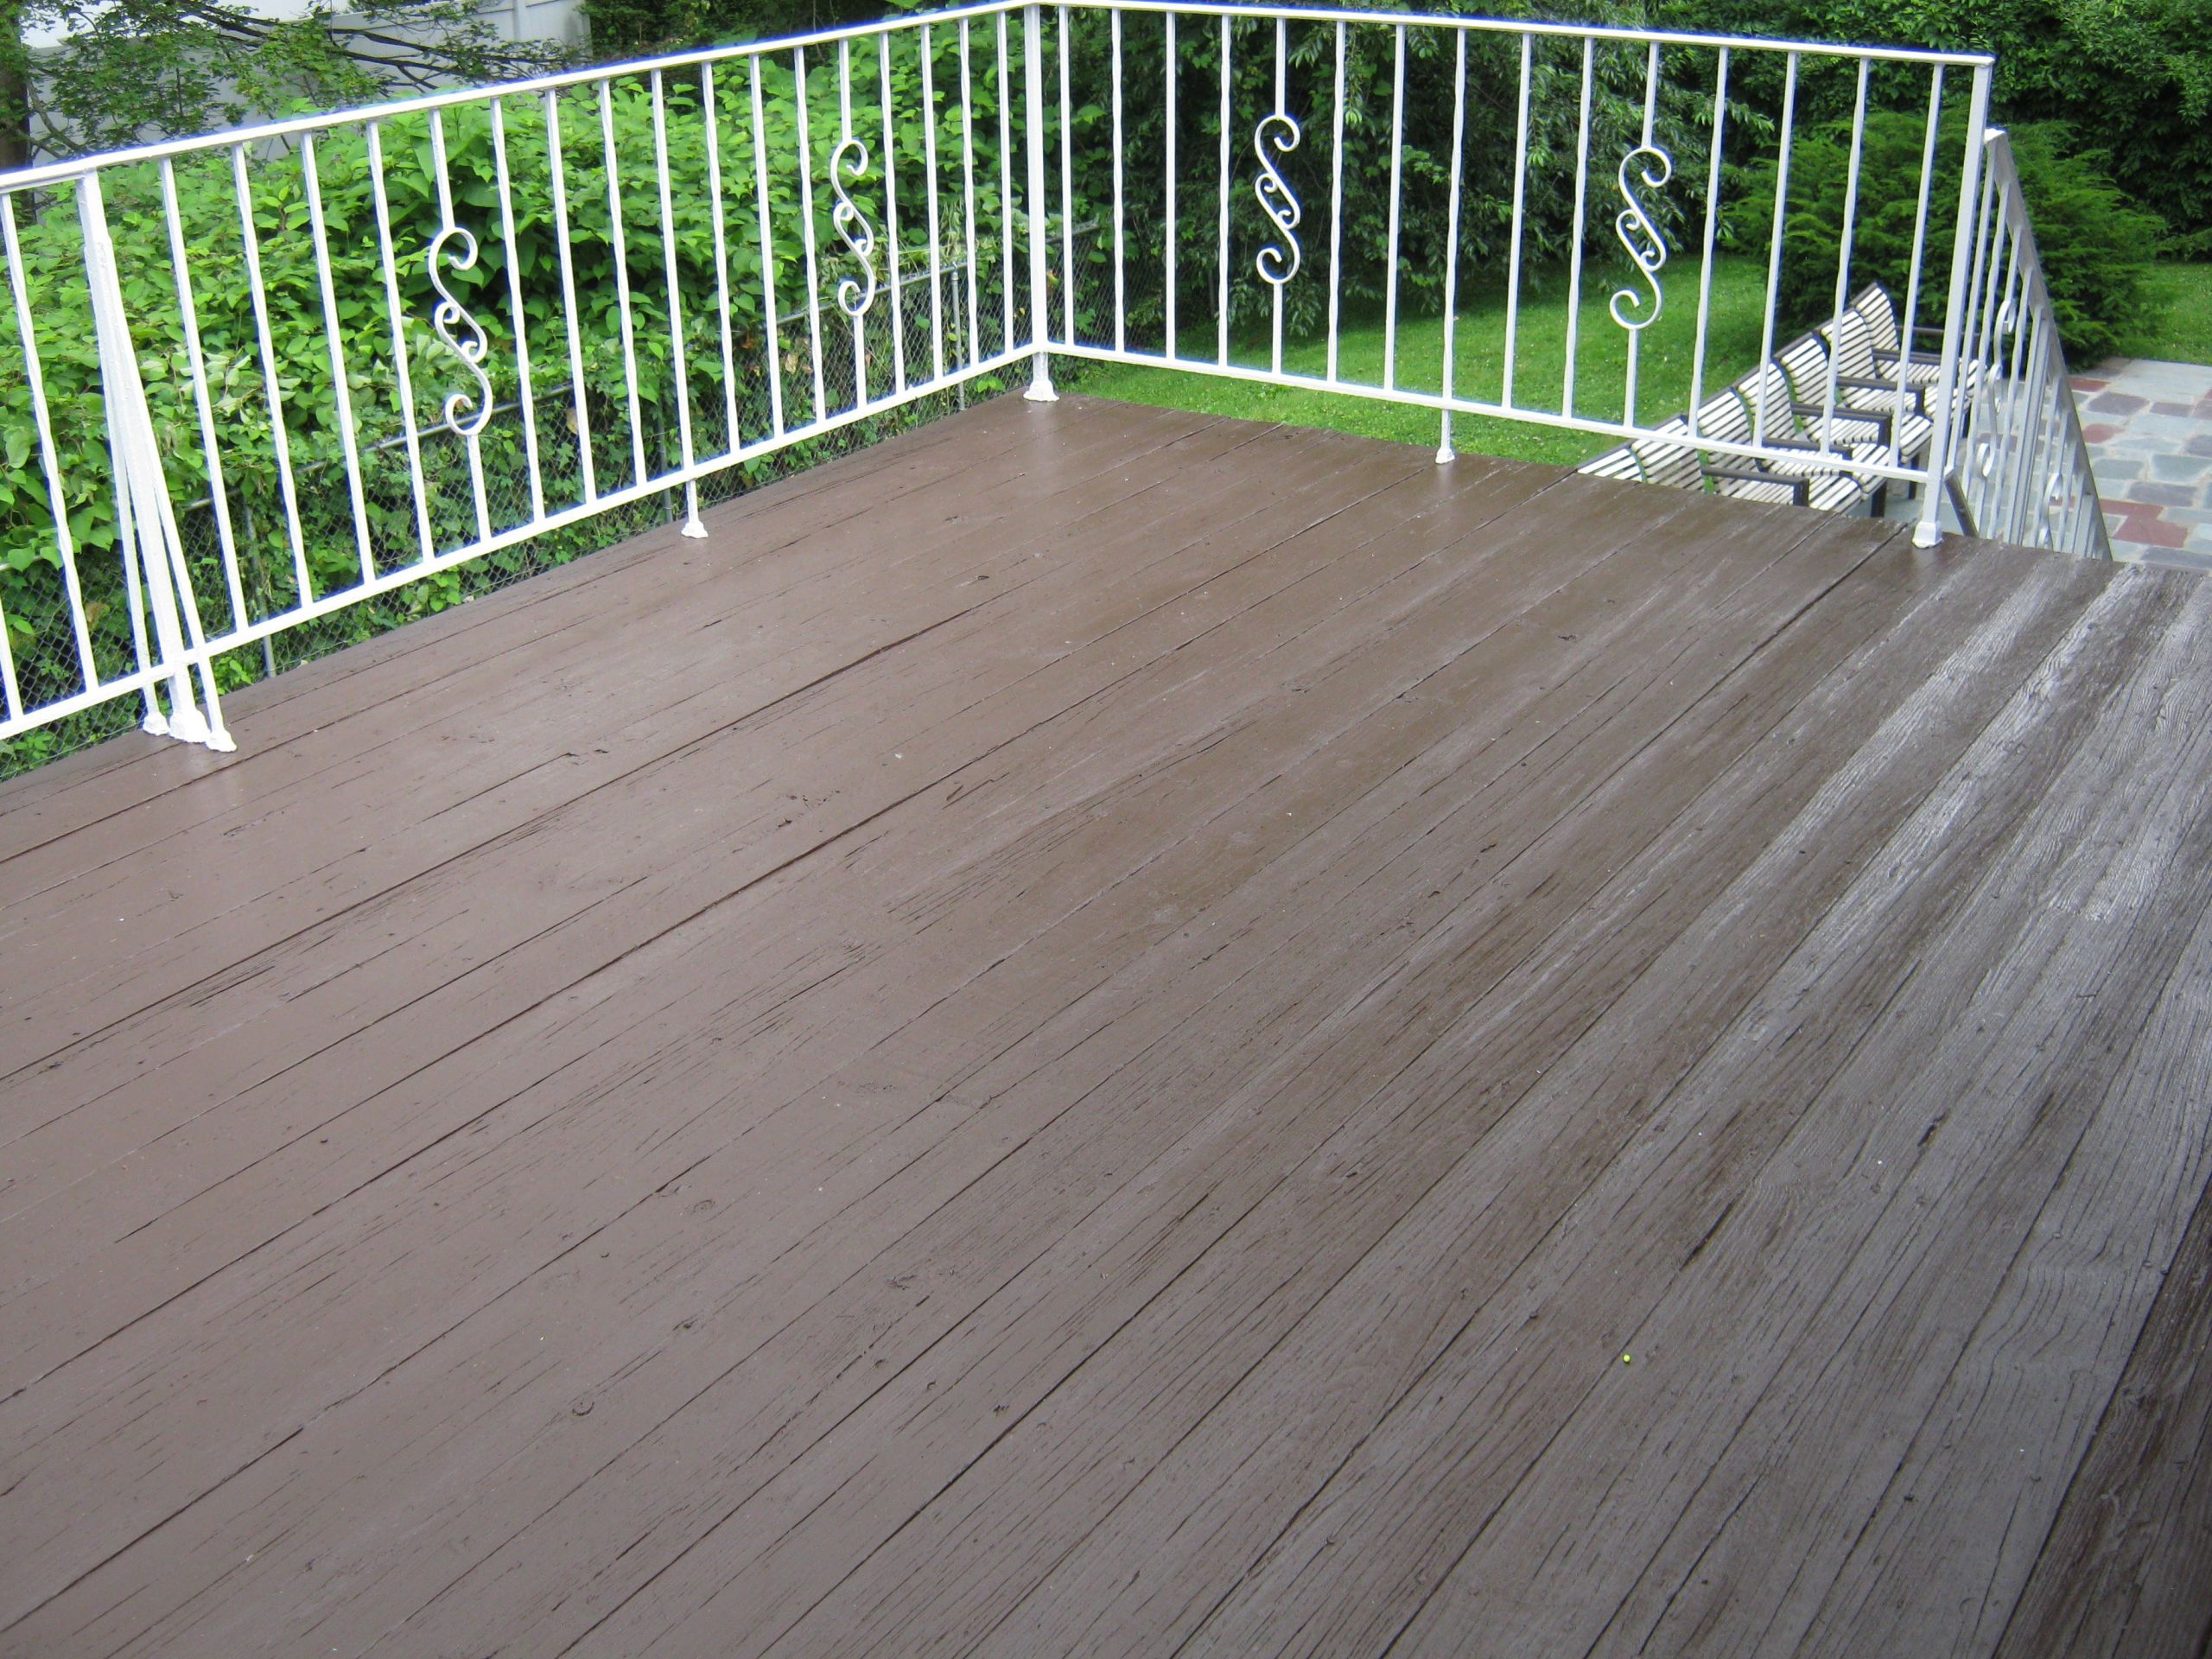 Textured Deck Paint Lowes
 Tips Stunning Sherwin Williams Deckscapes For Home